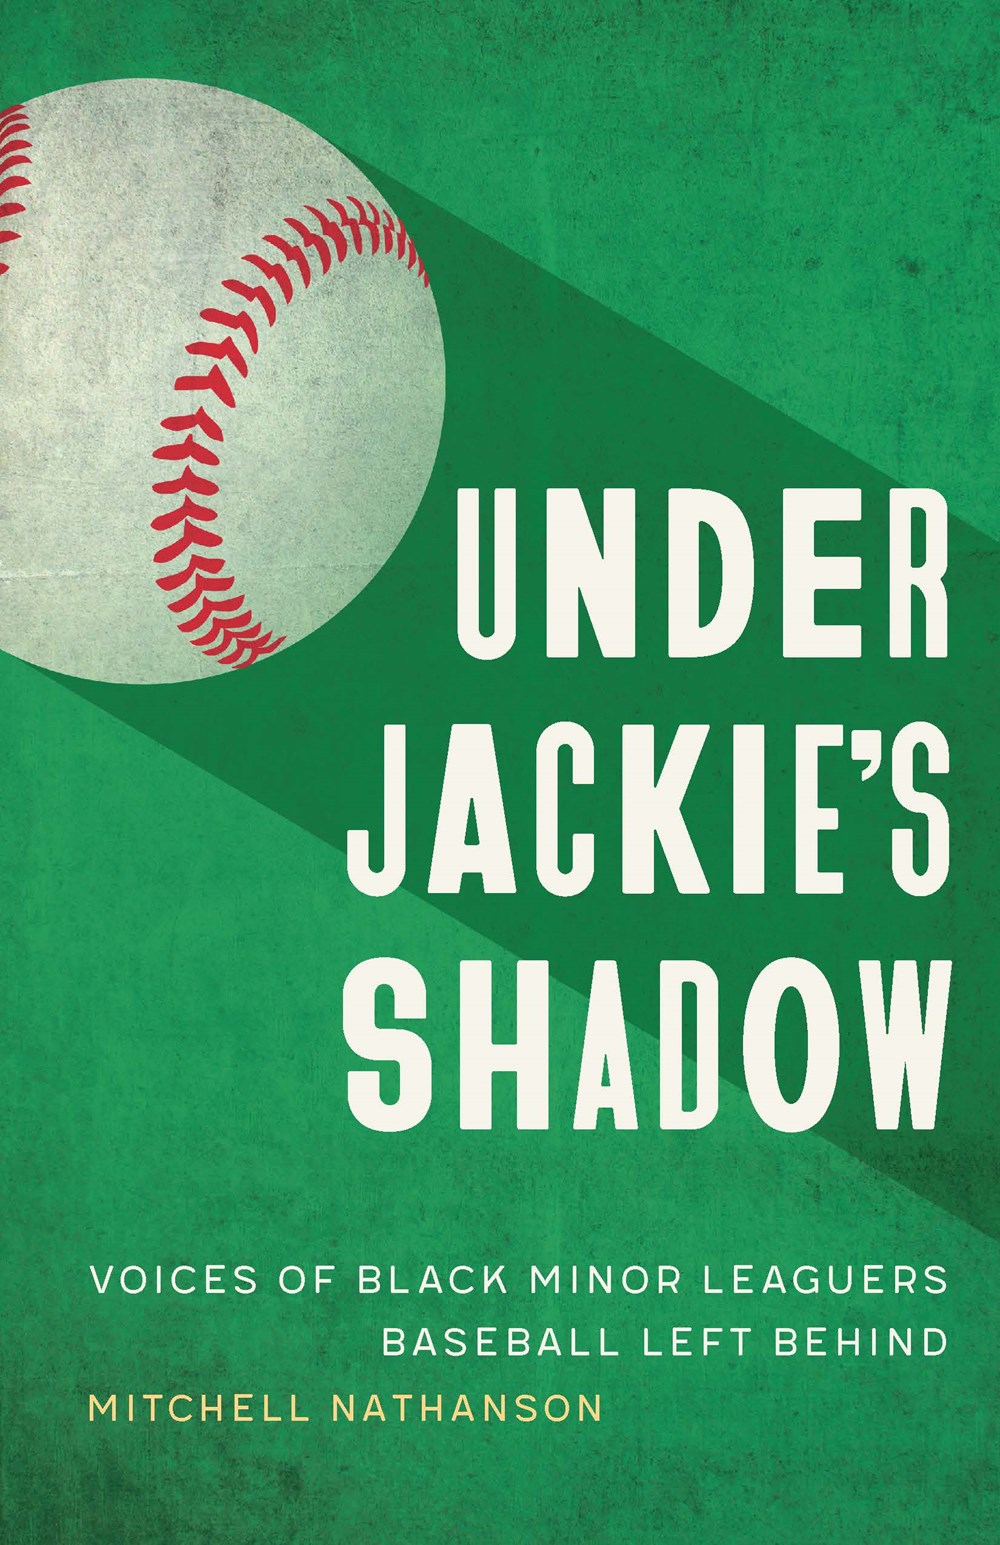 Under Jackie’s Shadow: Voices of Black Minor Leaguers Baseball Left Behind